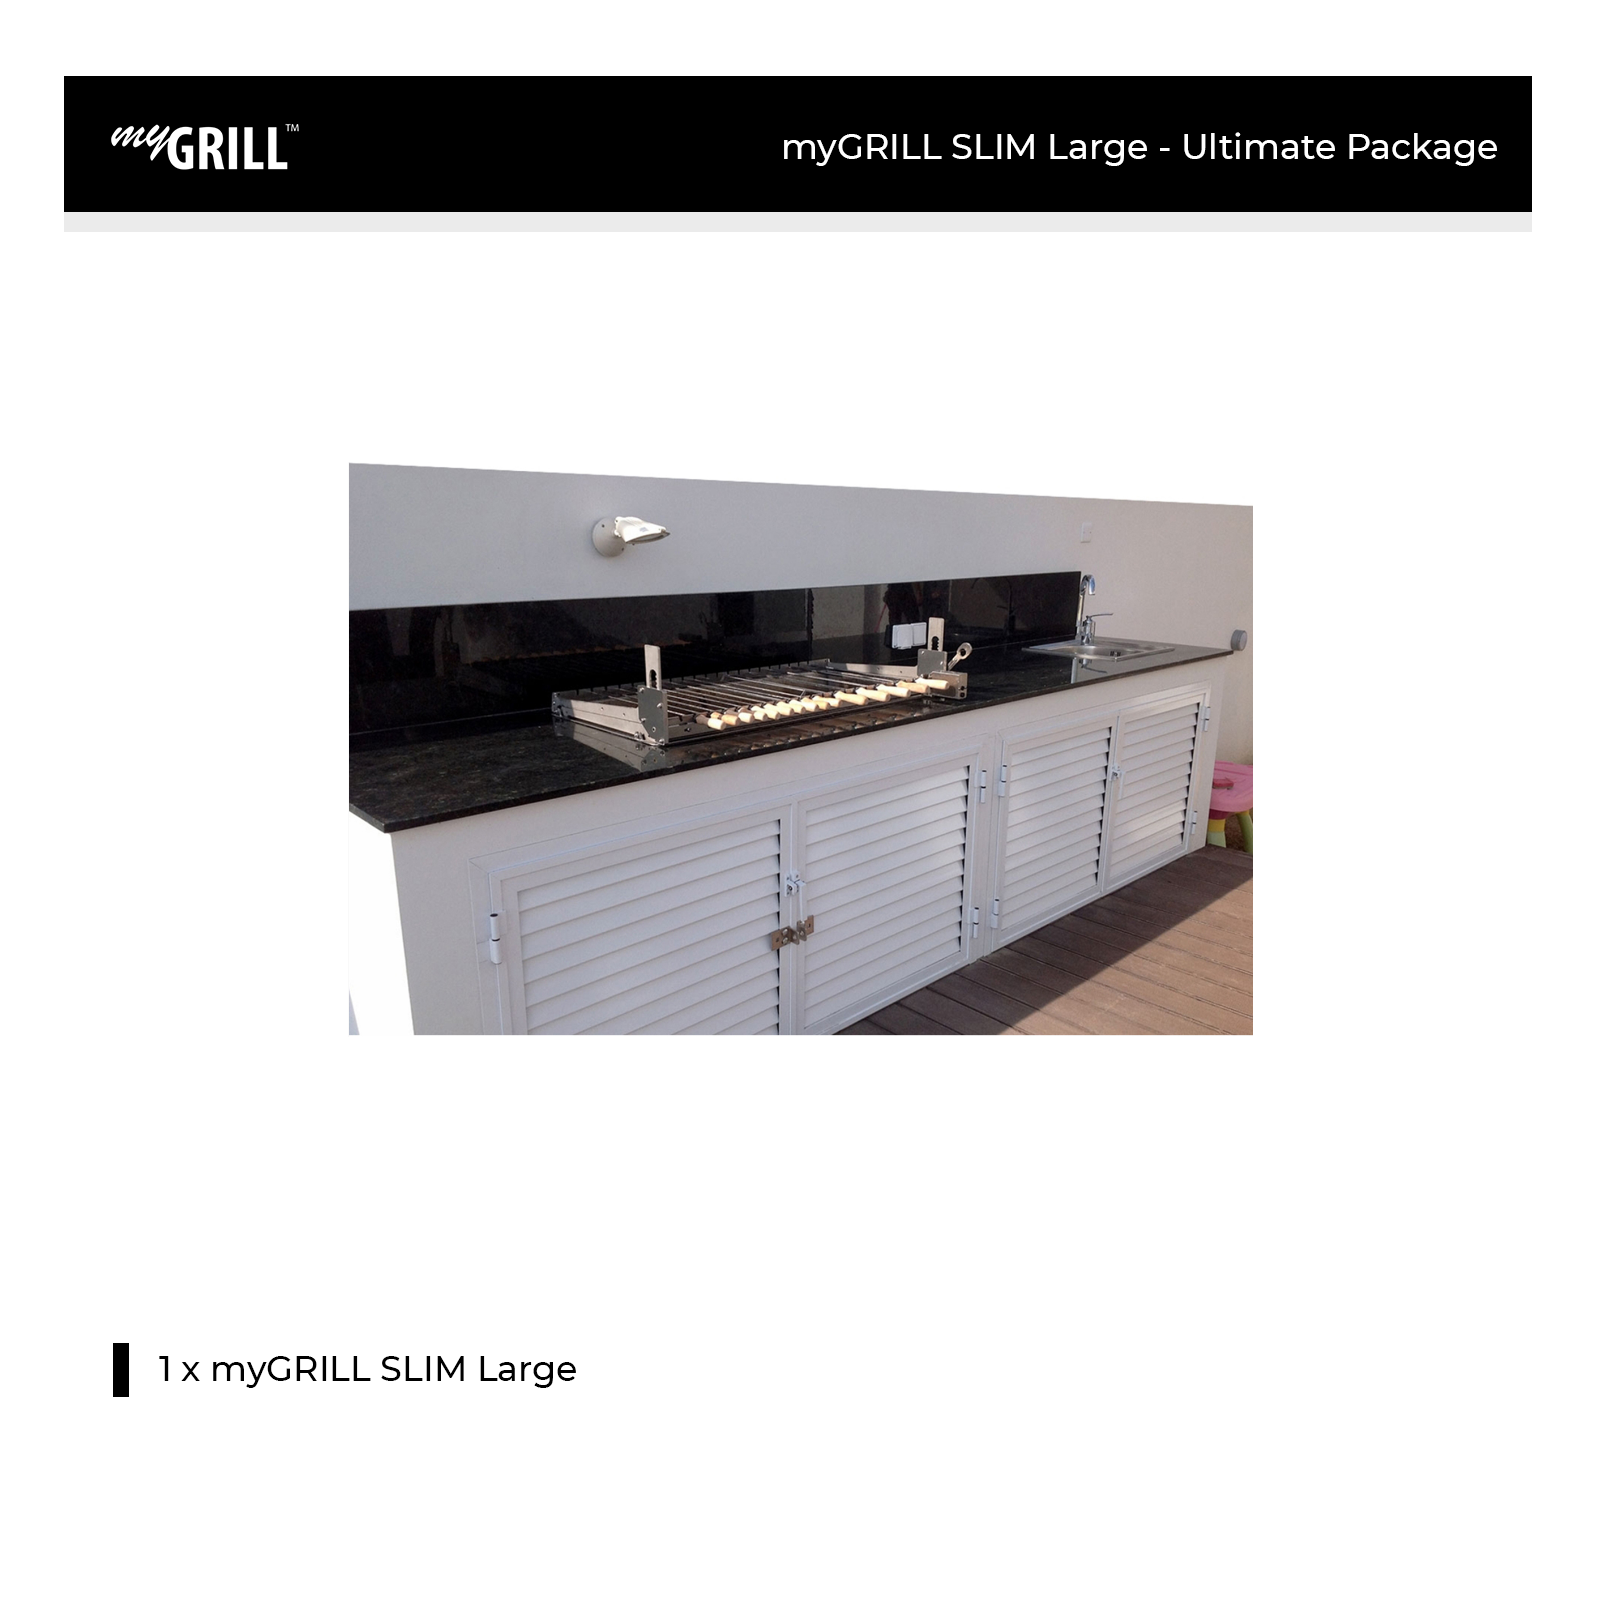 myGRILL SLIM Large - Ultimate Package (Drop In Charcoal BBQ & Rotisserie) - 950015-03003015